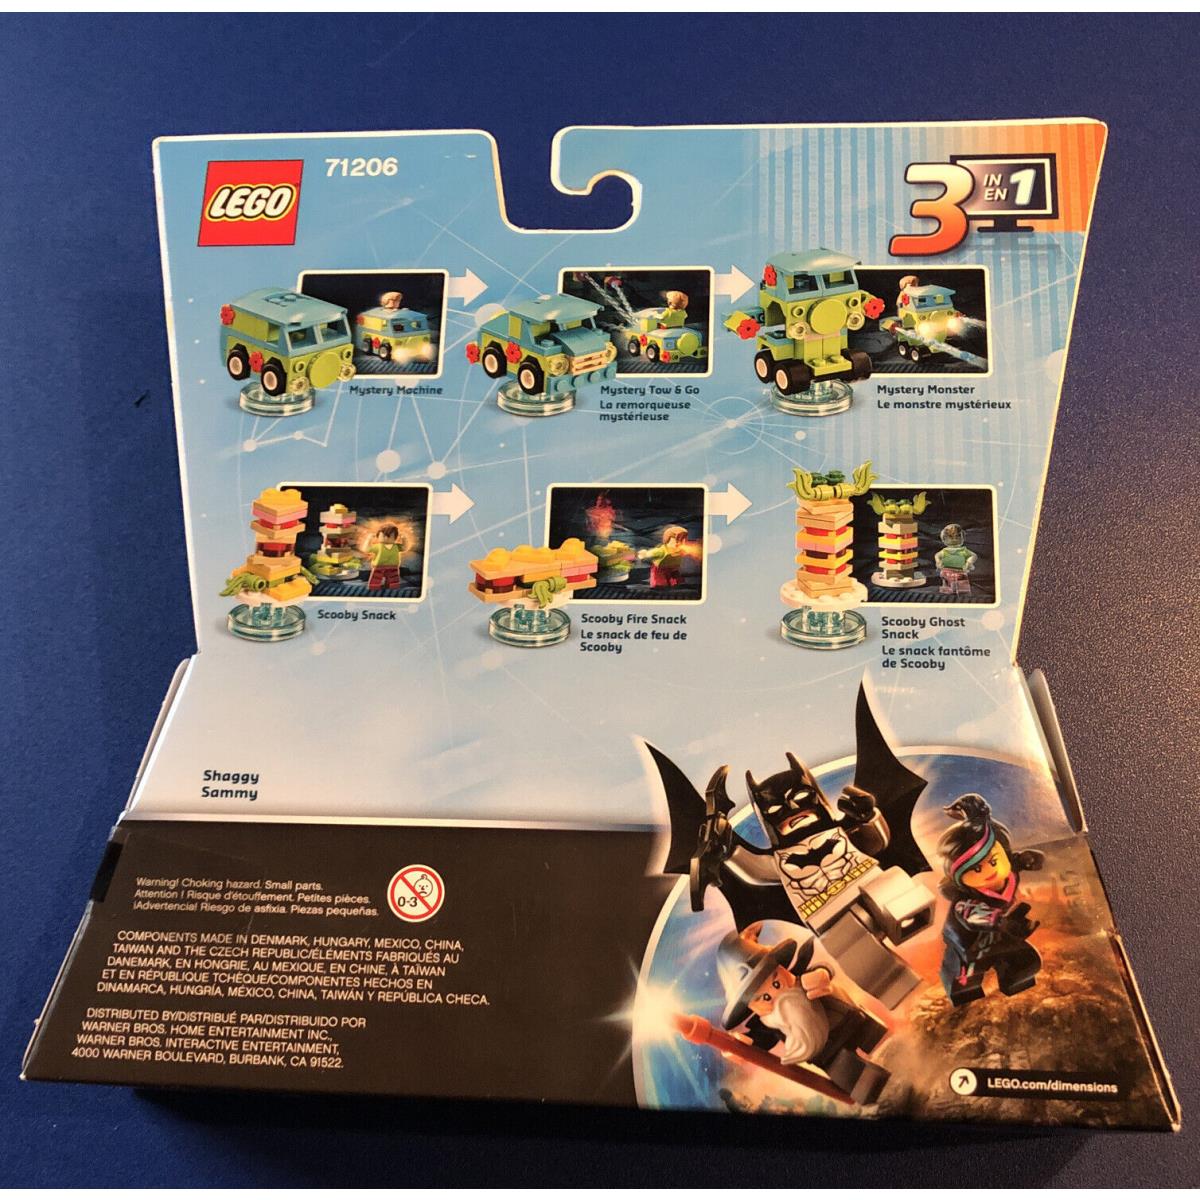 Lego 71206 Dimensions Scooby Doo Team Pack